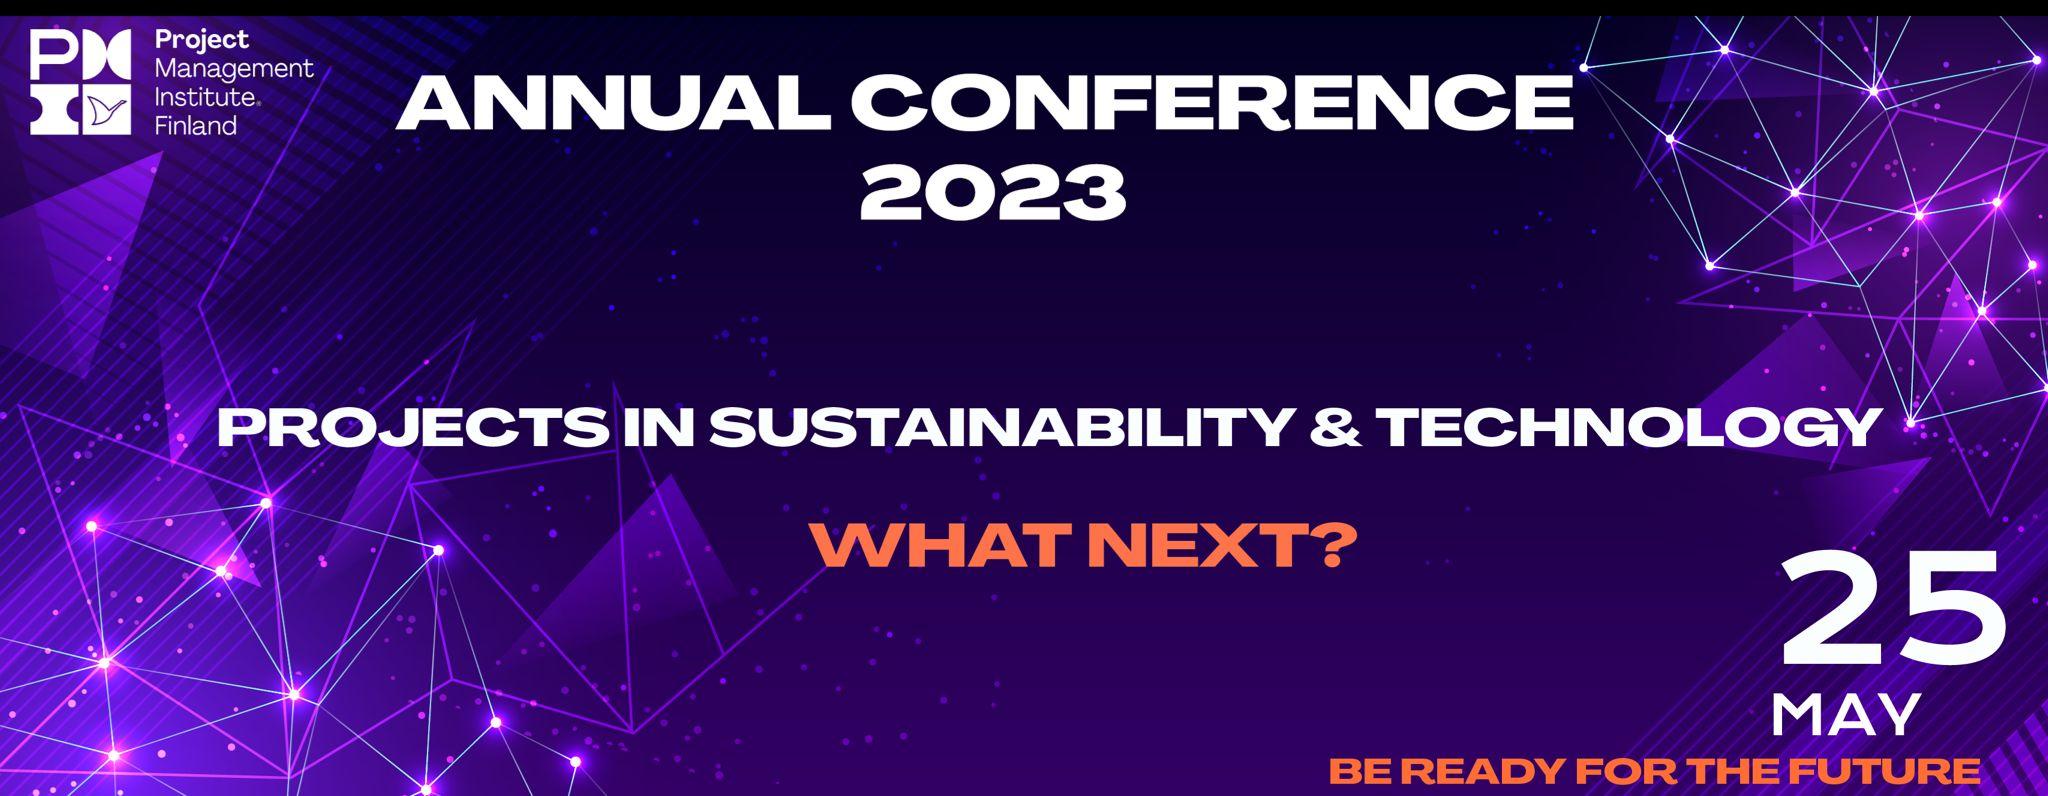 Annual-Conference-2023.jpeg